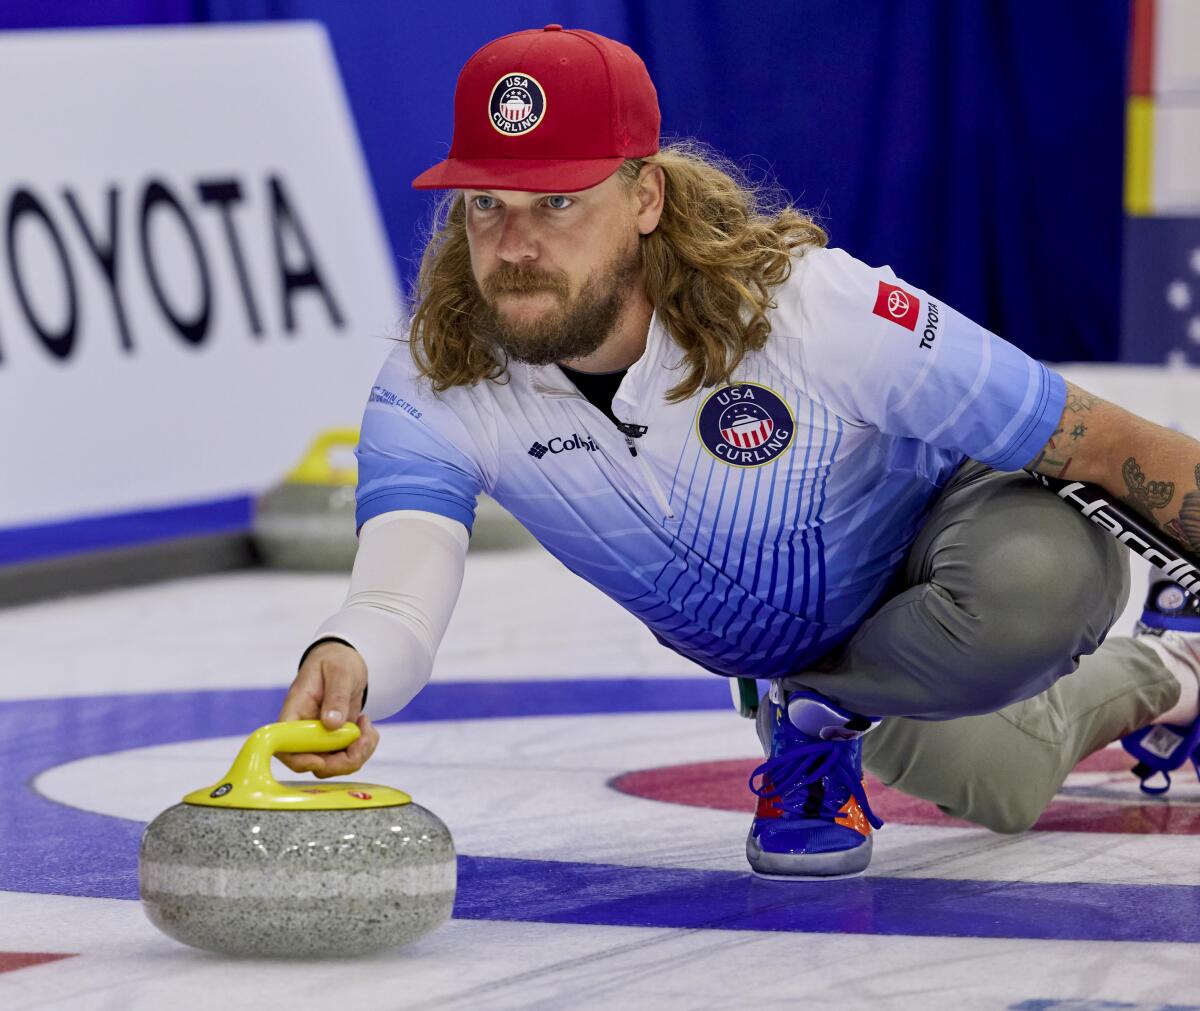 Matt Hamilton stretches forward on the ice, one hand on the curling stone.